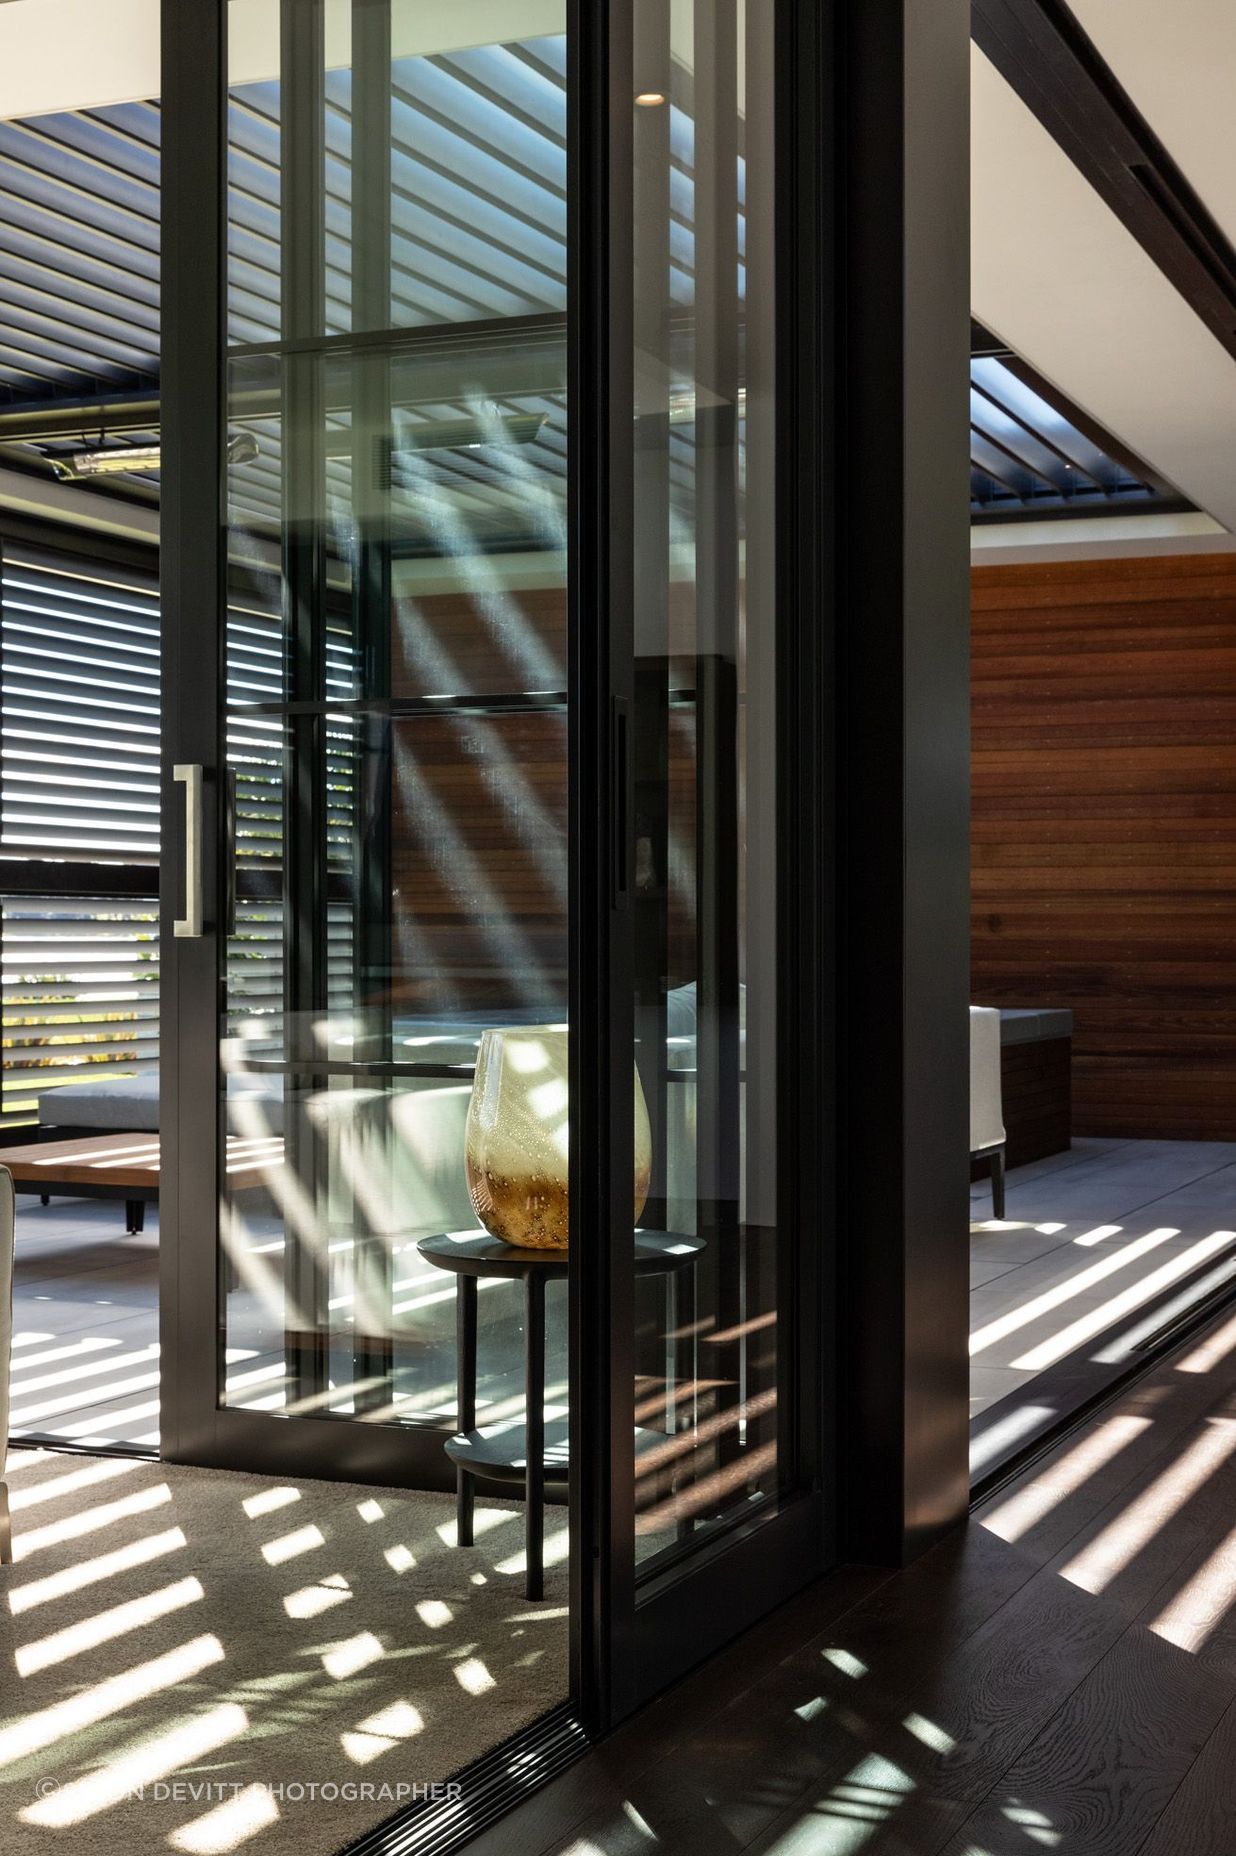 Louvres cast light and shadow into the outdoor room, which opens up on two sides.